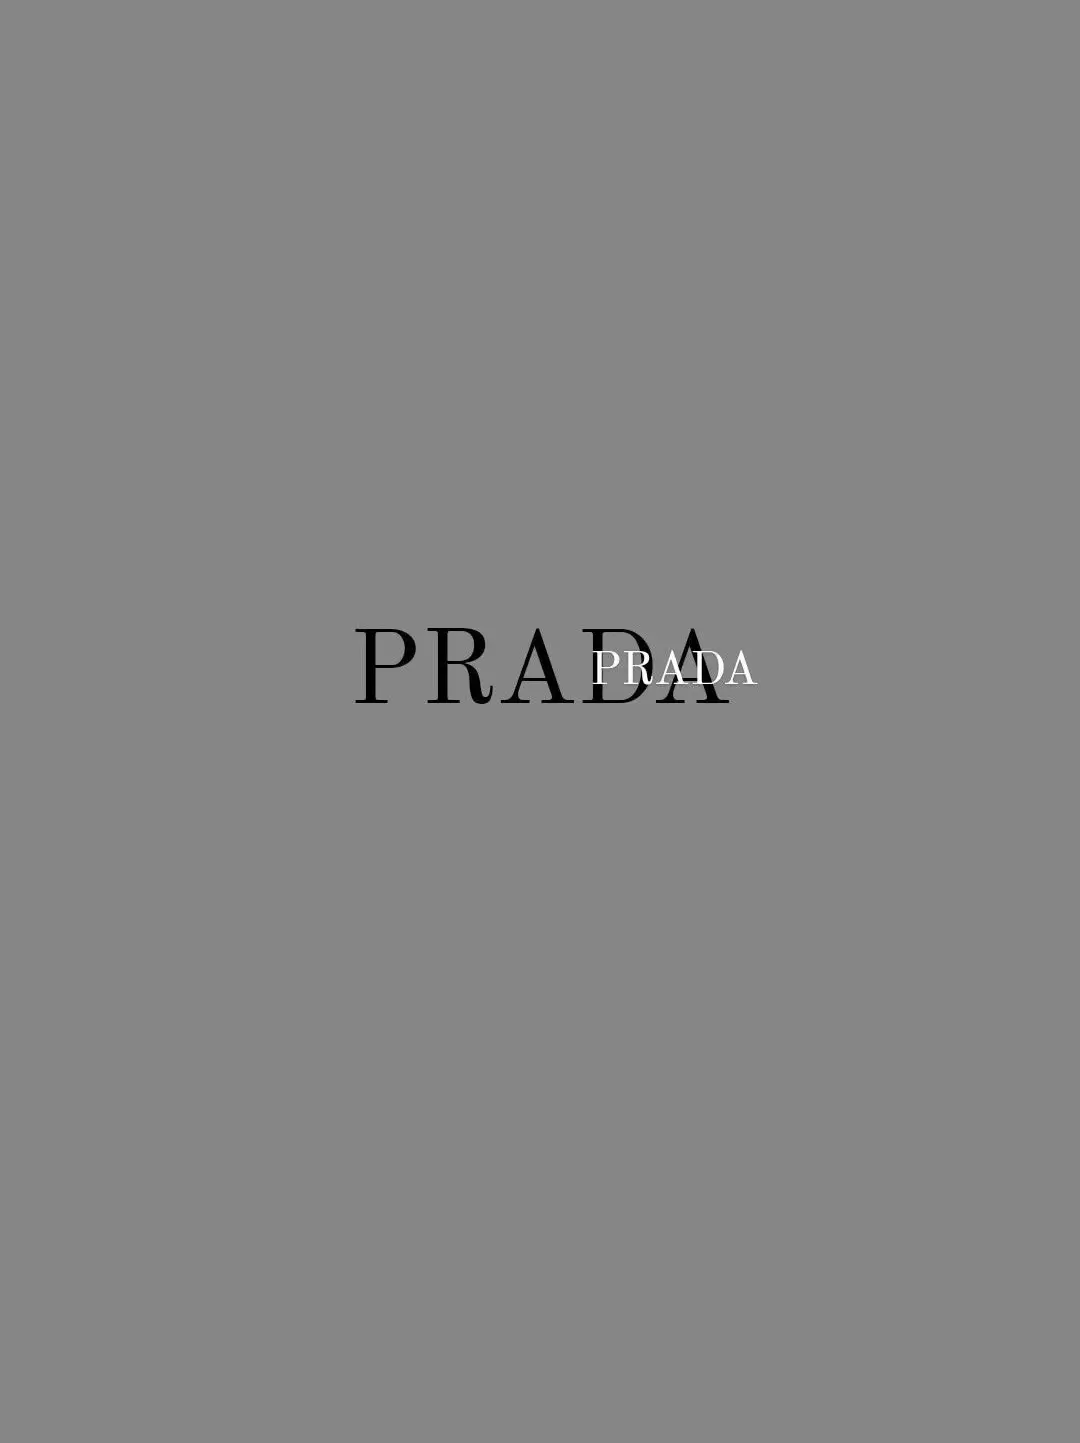  A white background with the word Prada on it.